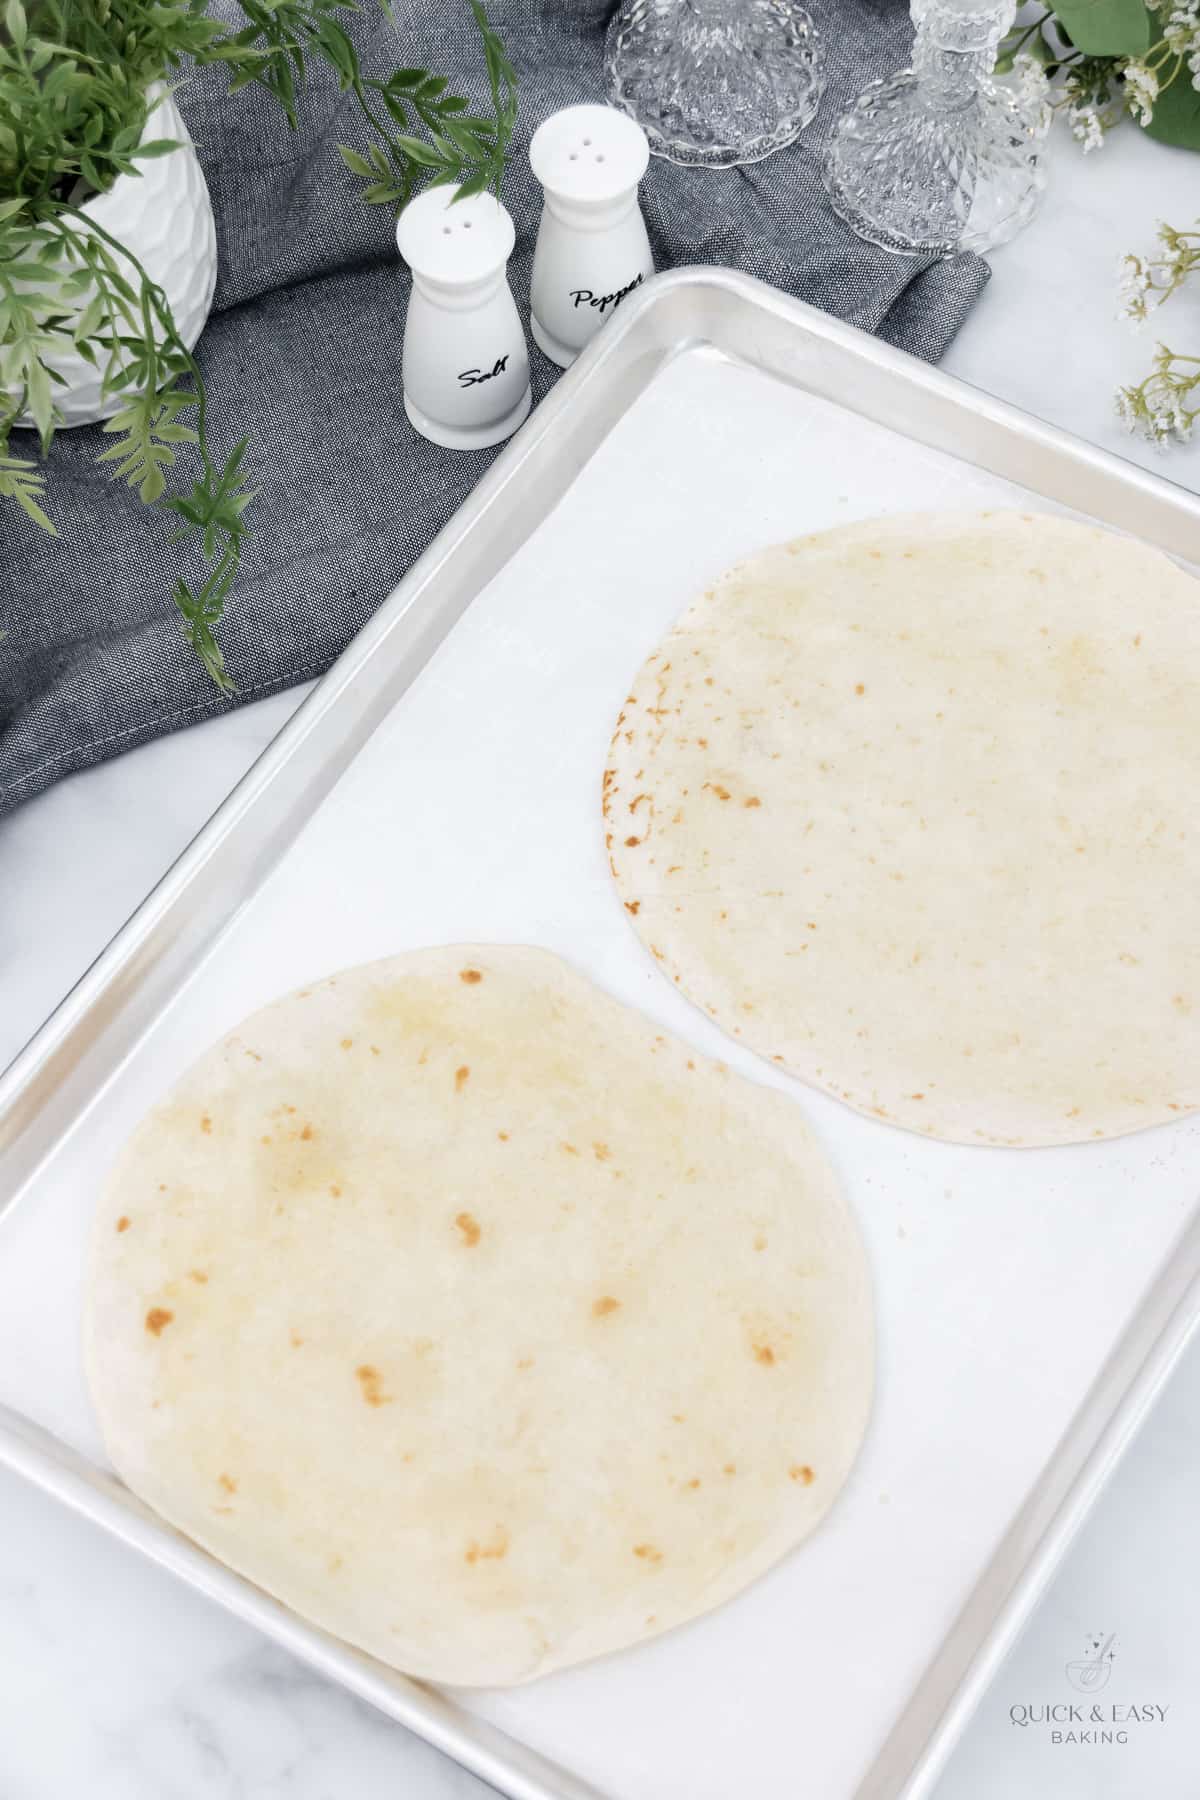 Top down view of flour tortillas with oil on a baking sheet.